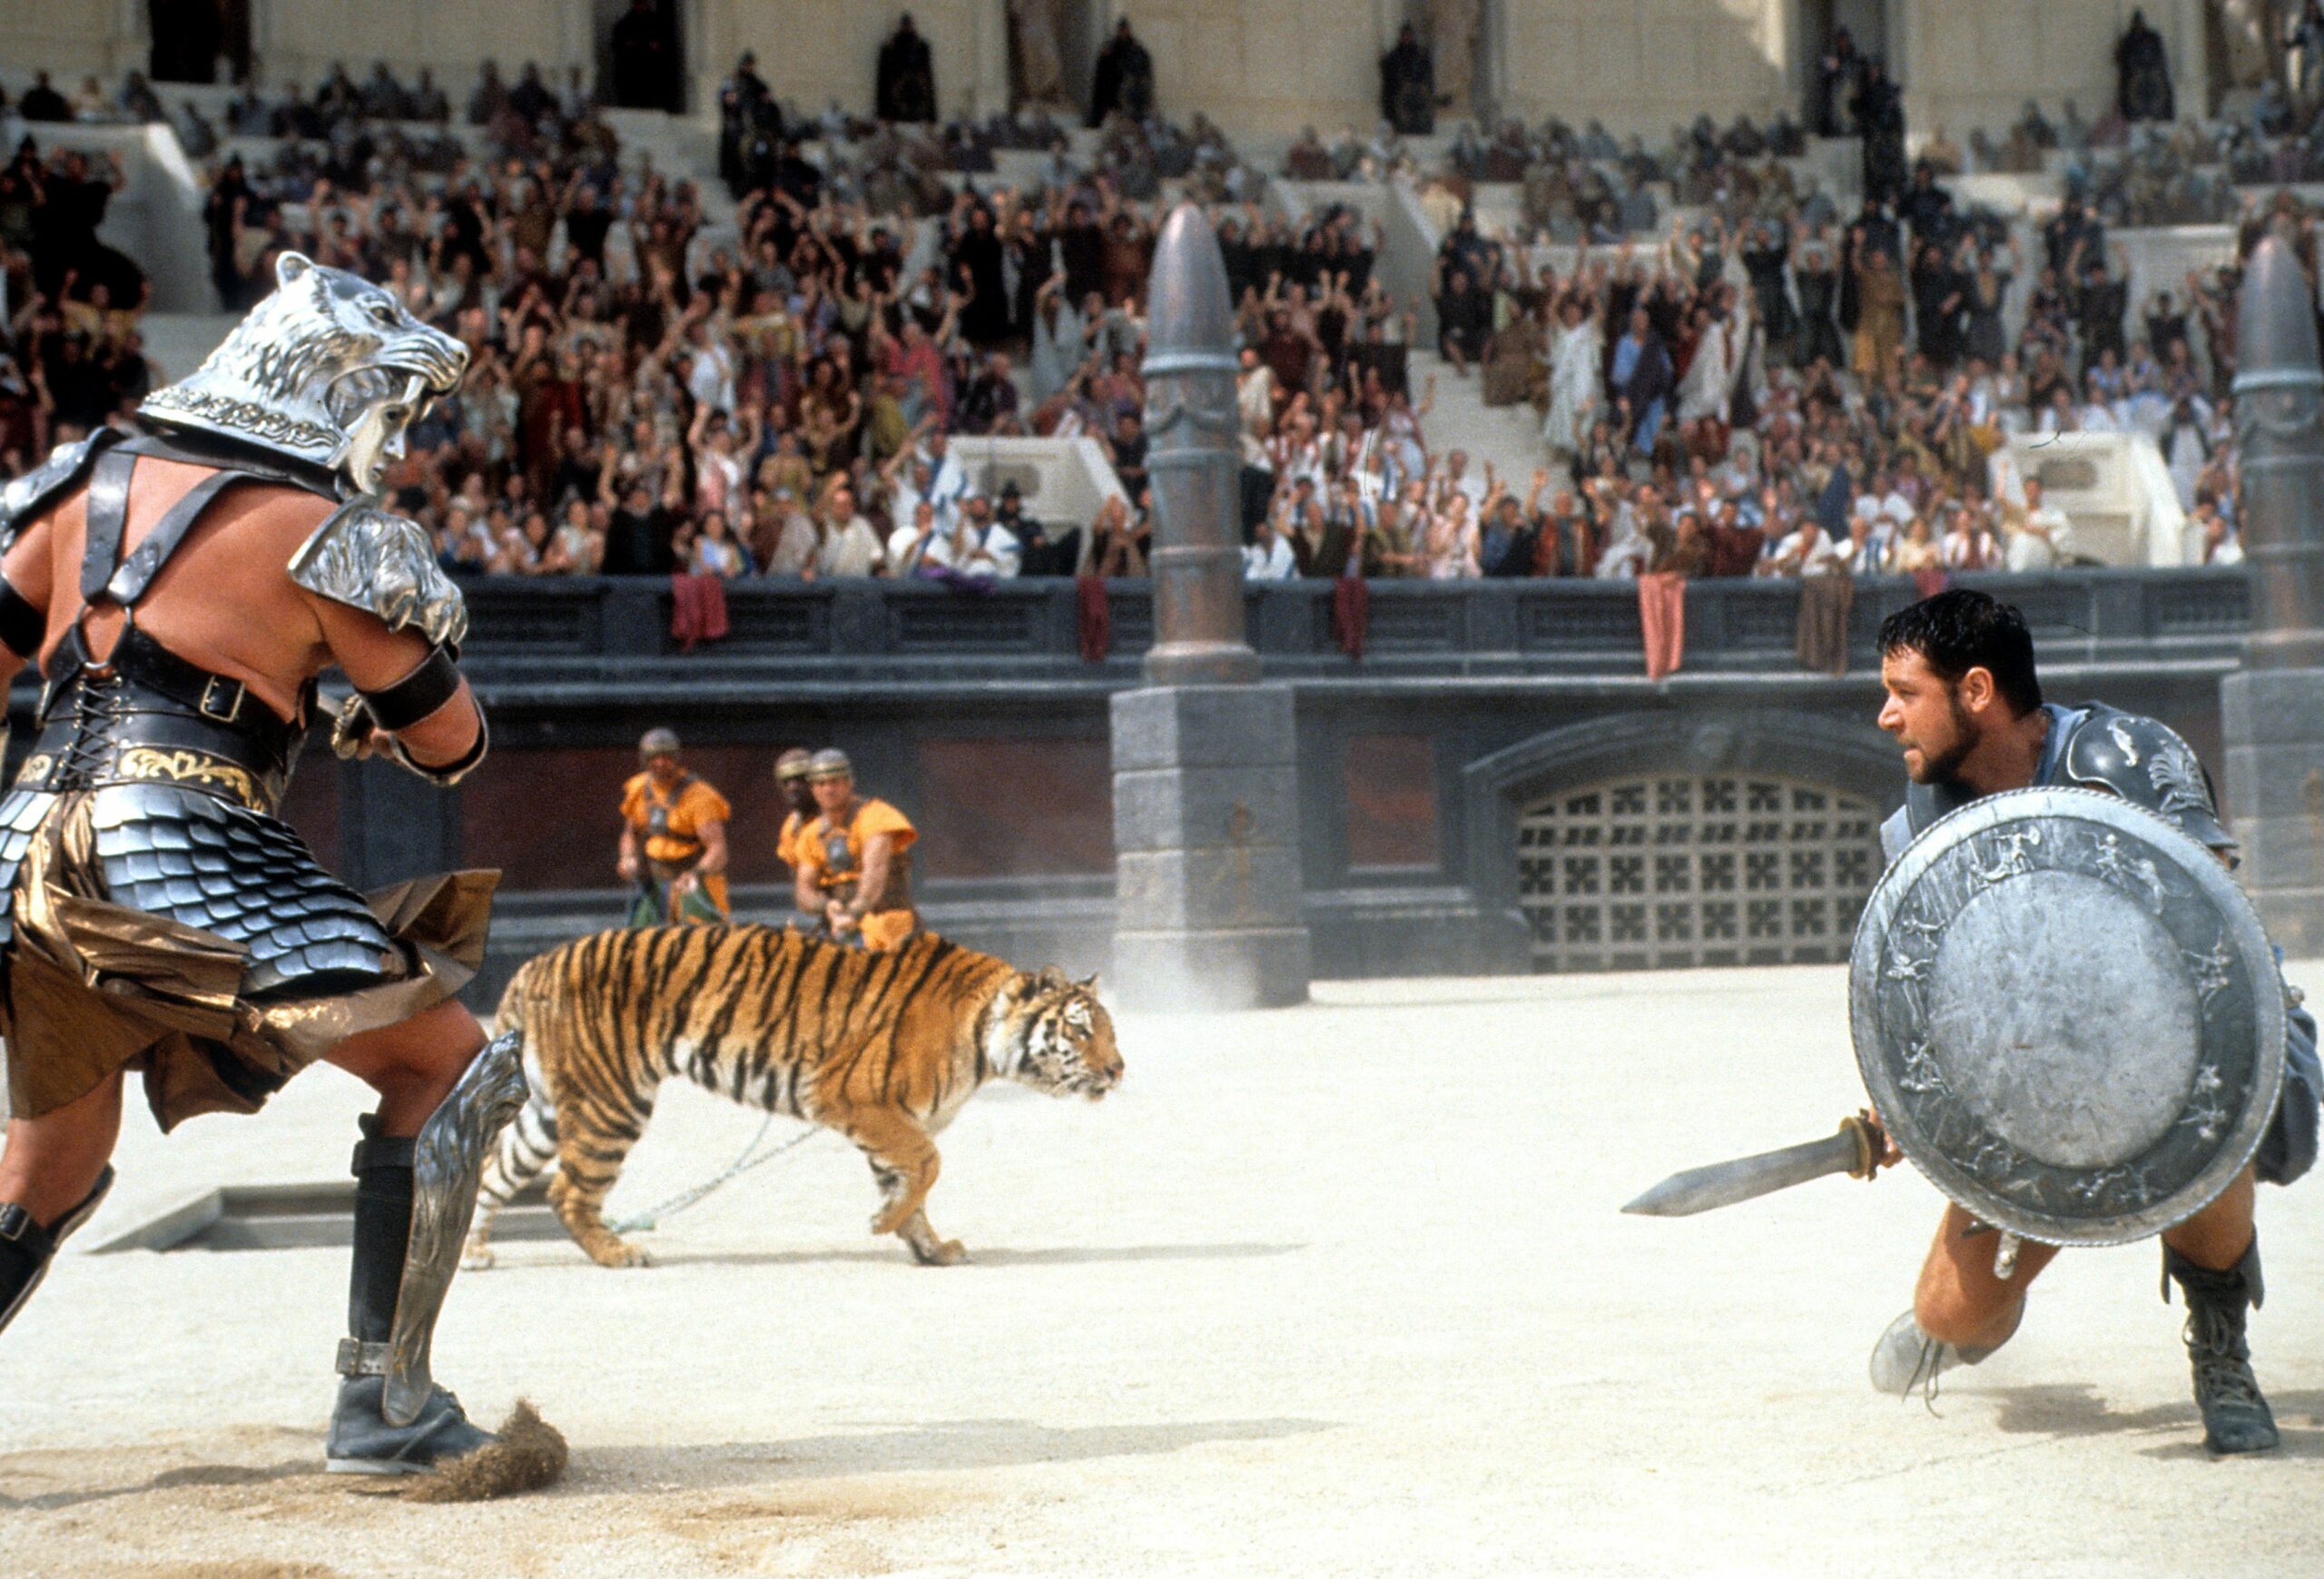 Gladiator 2 Trailer to Premiere Before Deadpool and Wolverine